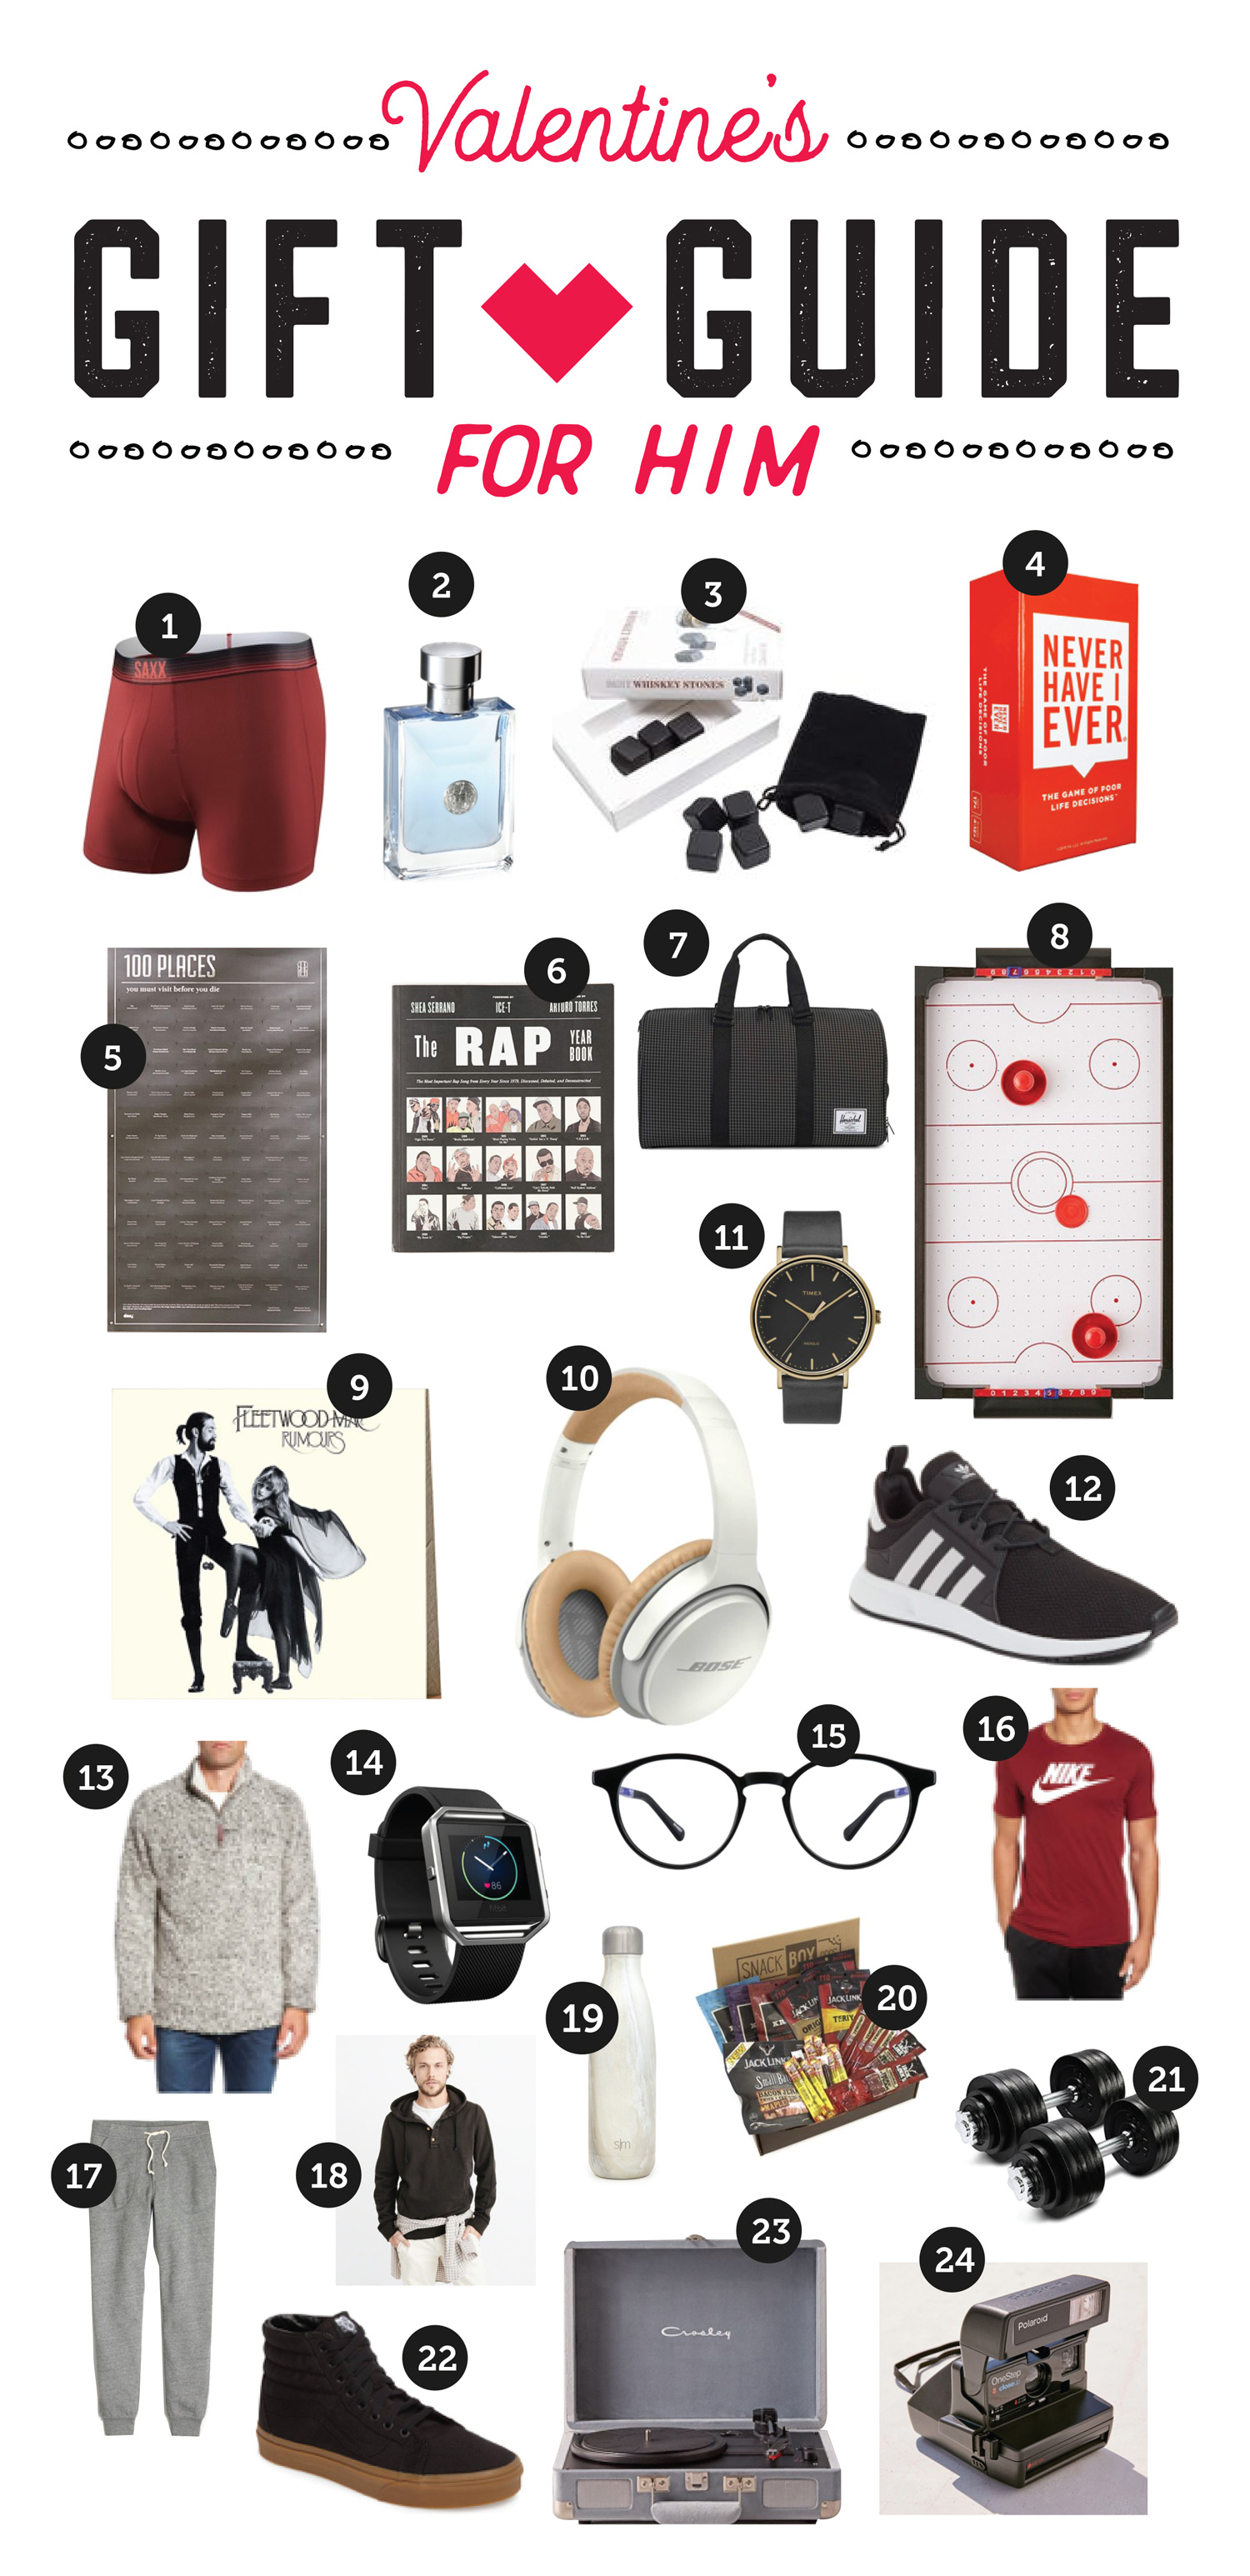 8 Valentine's Day Gift Ideas for Him